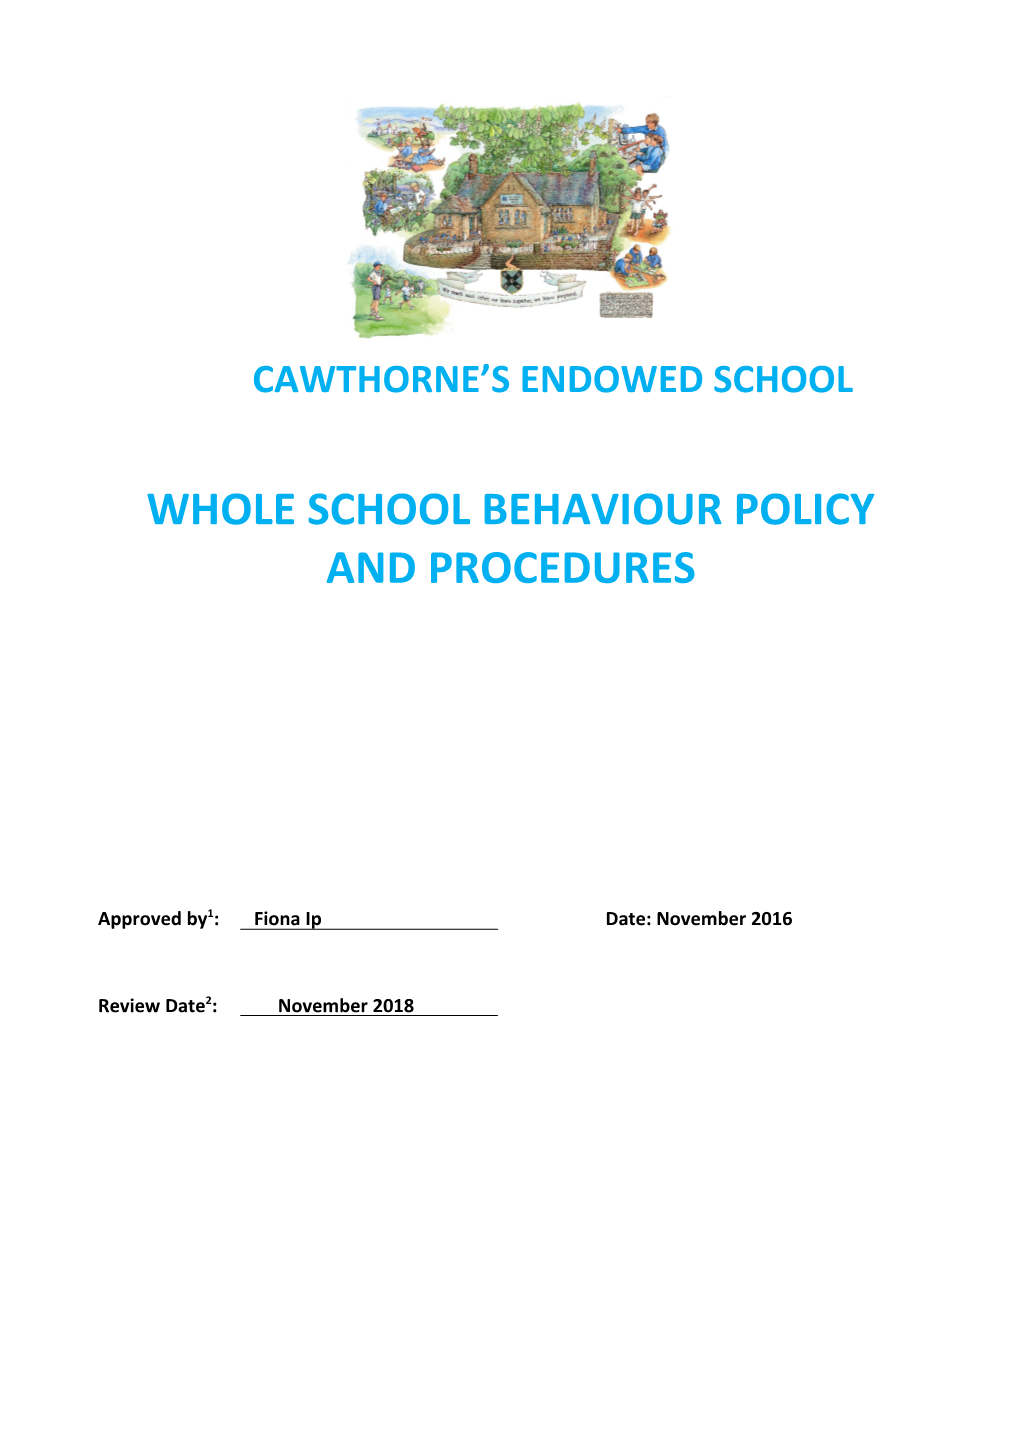 Whole School Behaviour Policy and Procedures